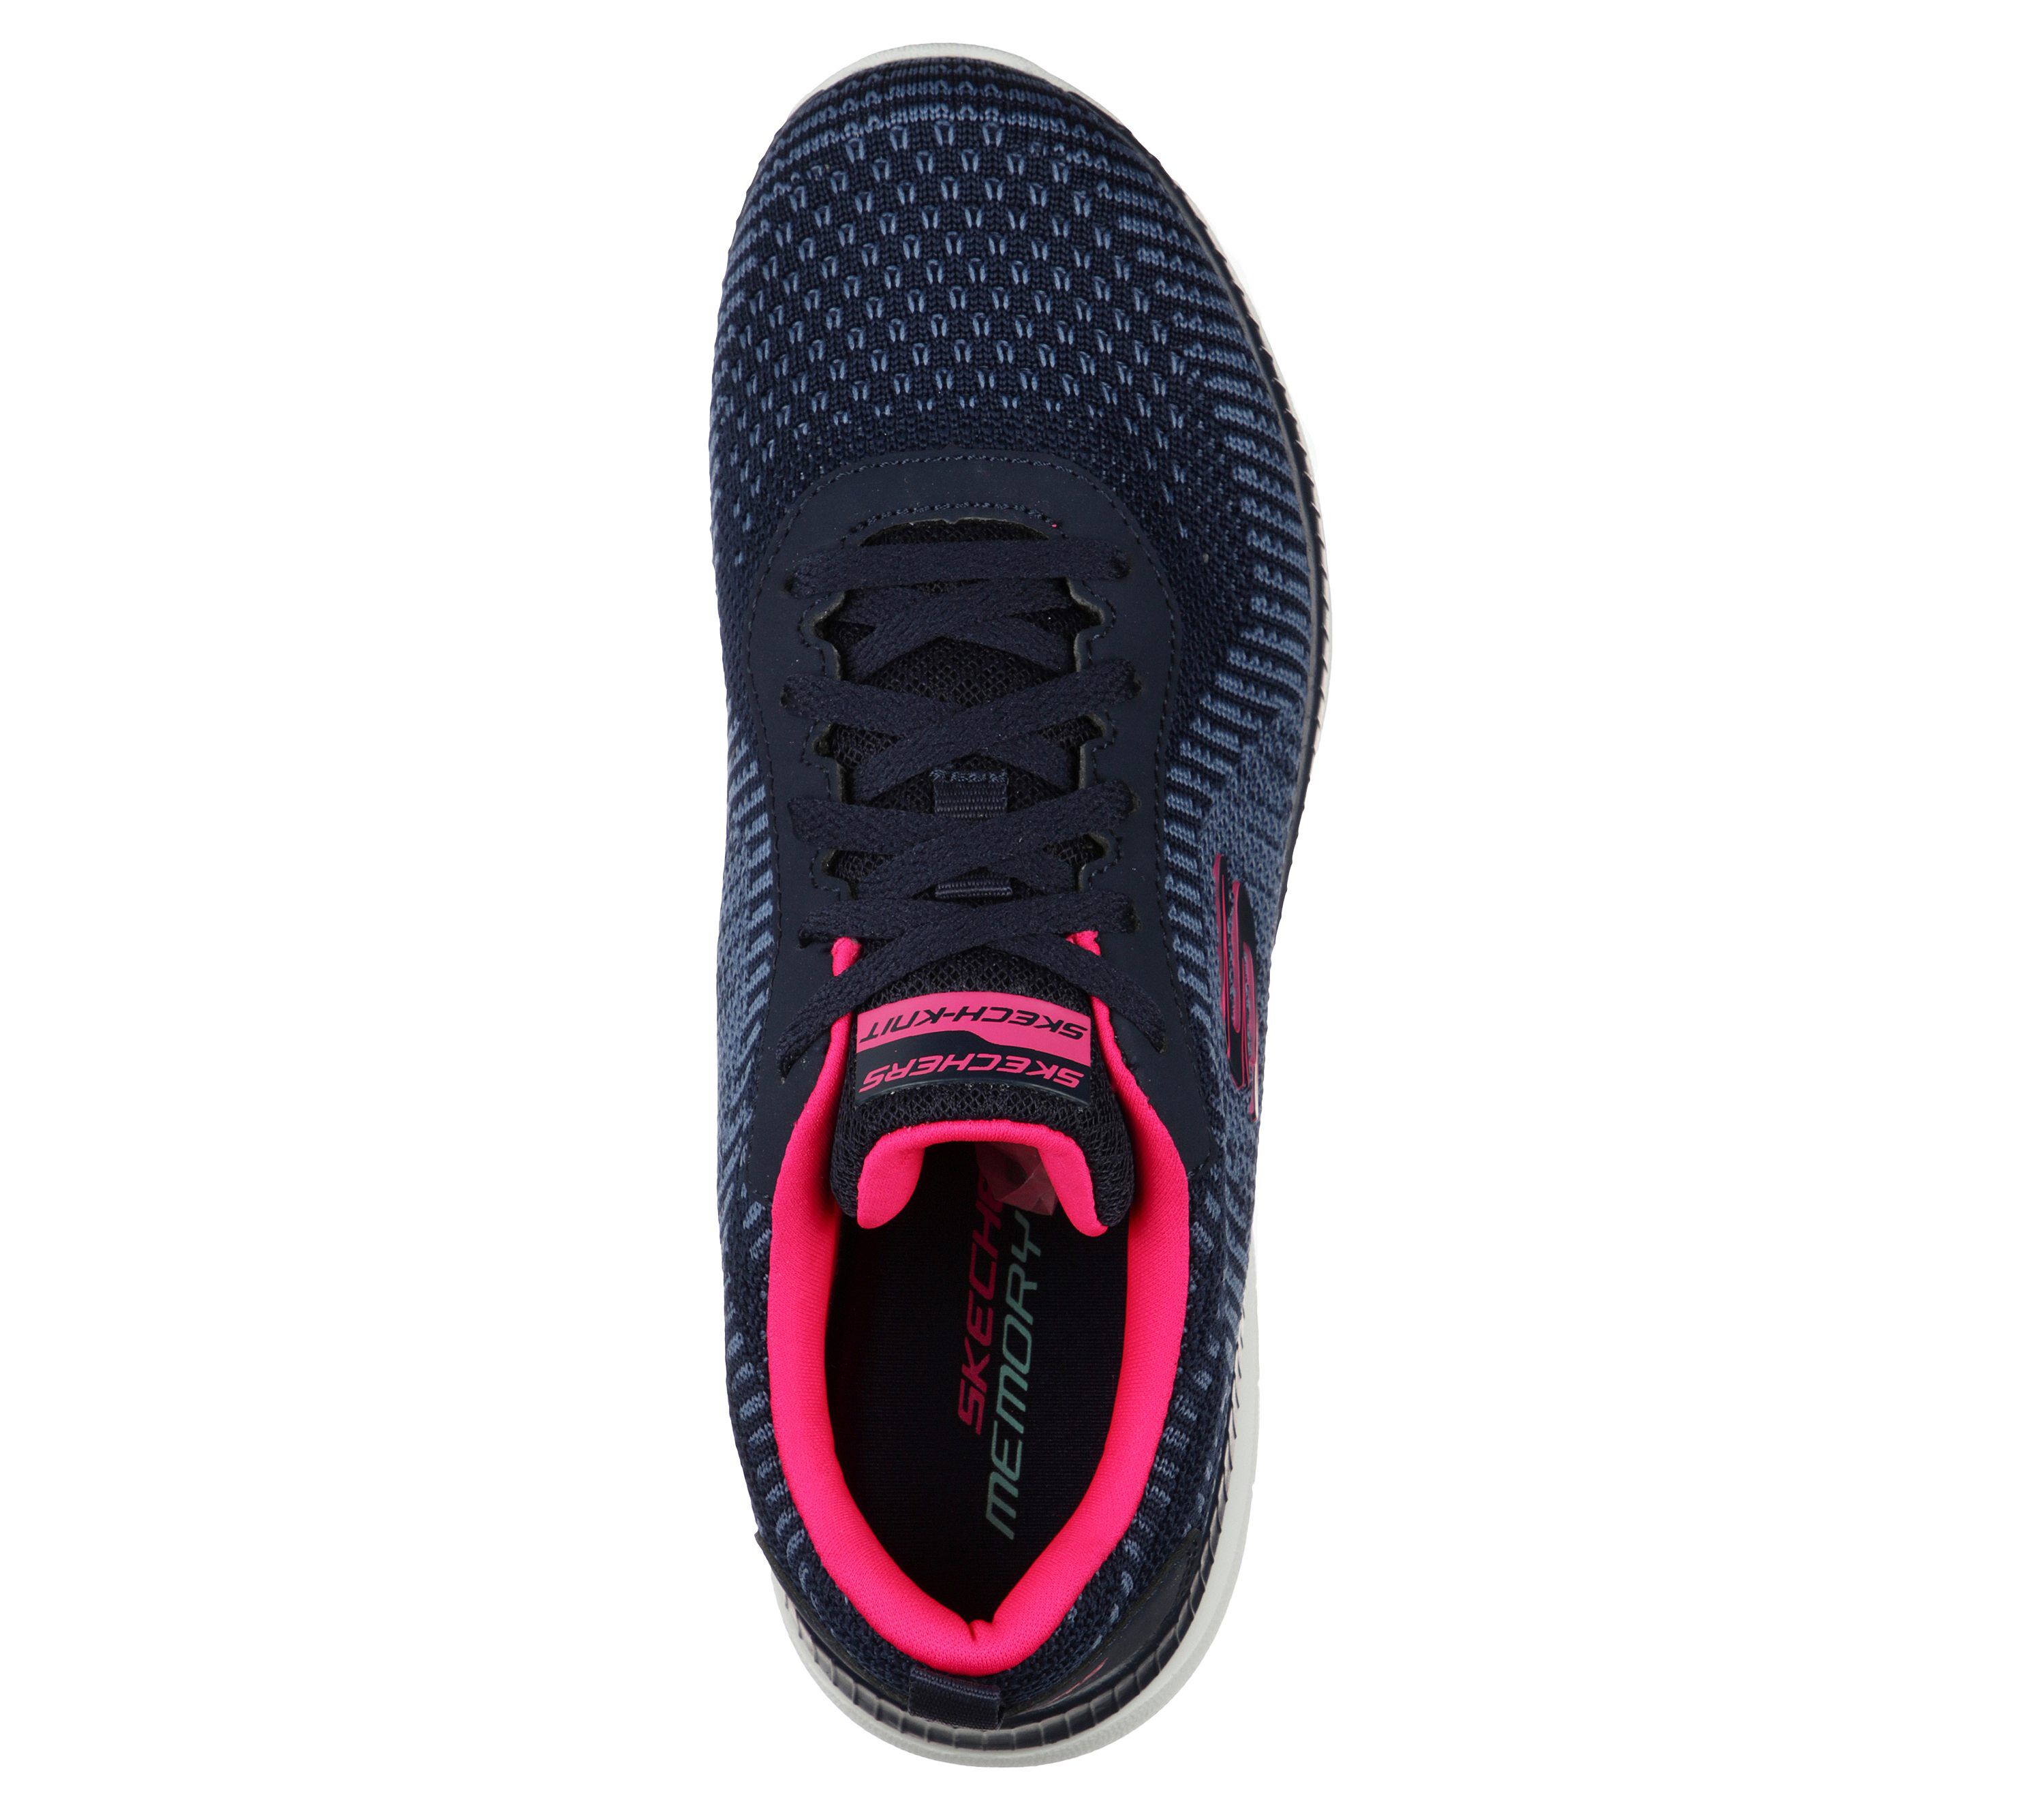 Skechers Bountiful - Purist - Navy / Hot Pink Polyester